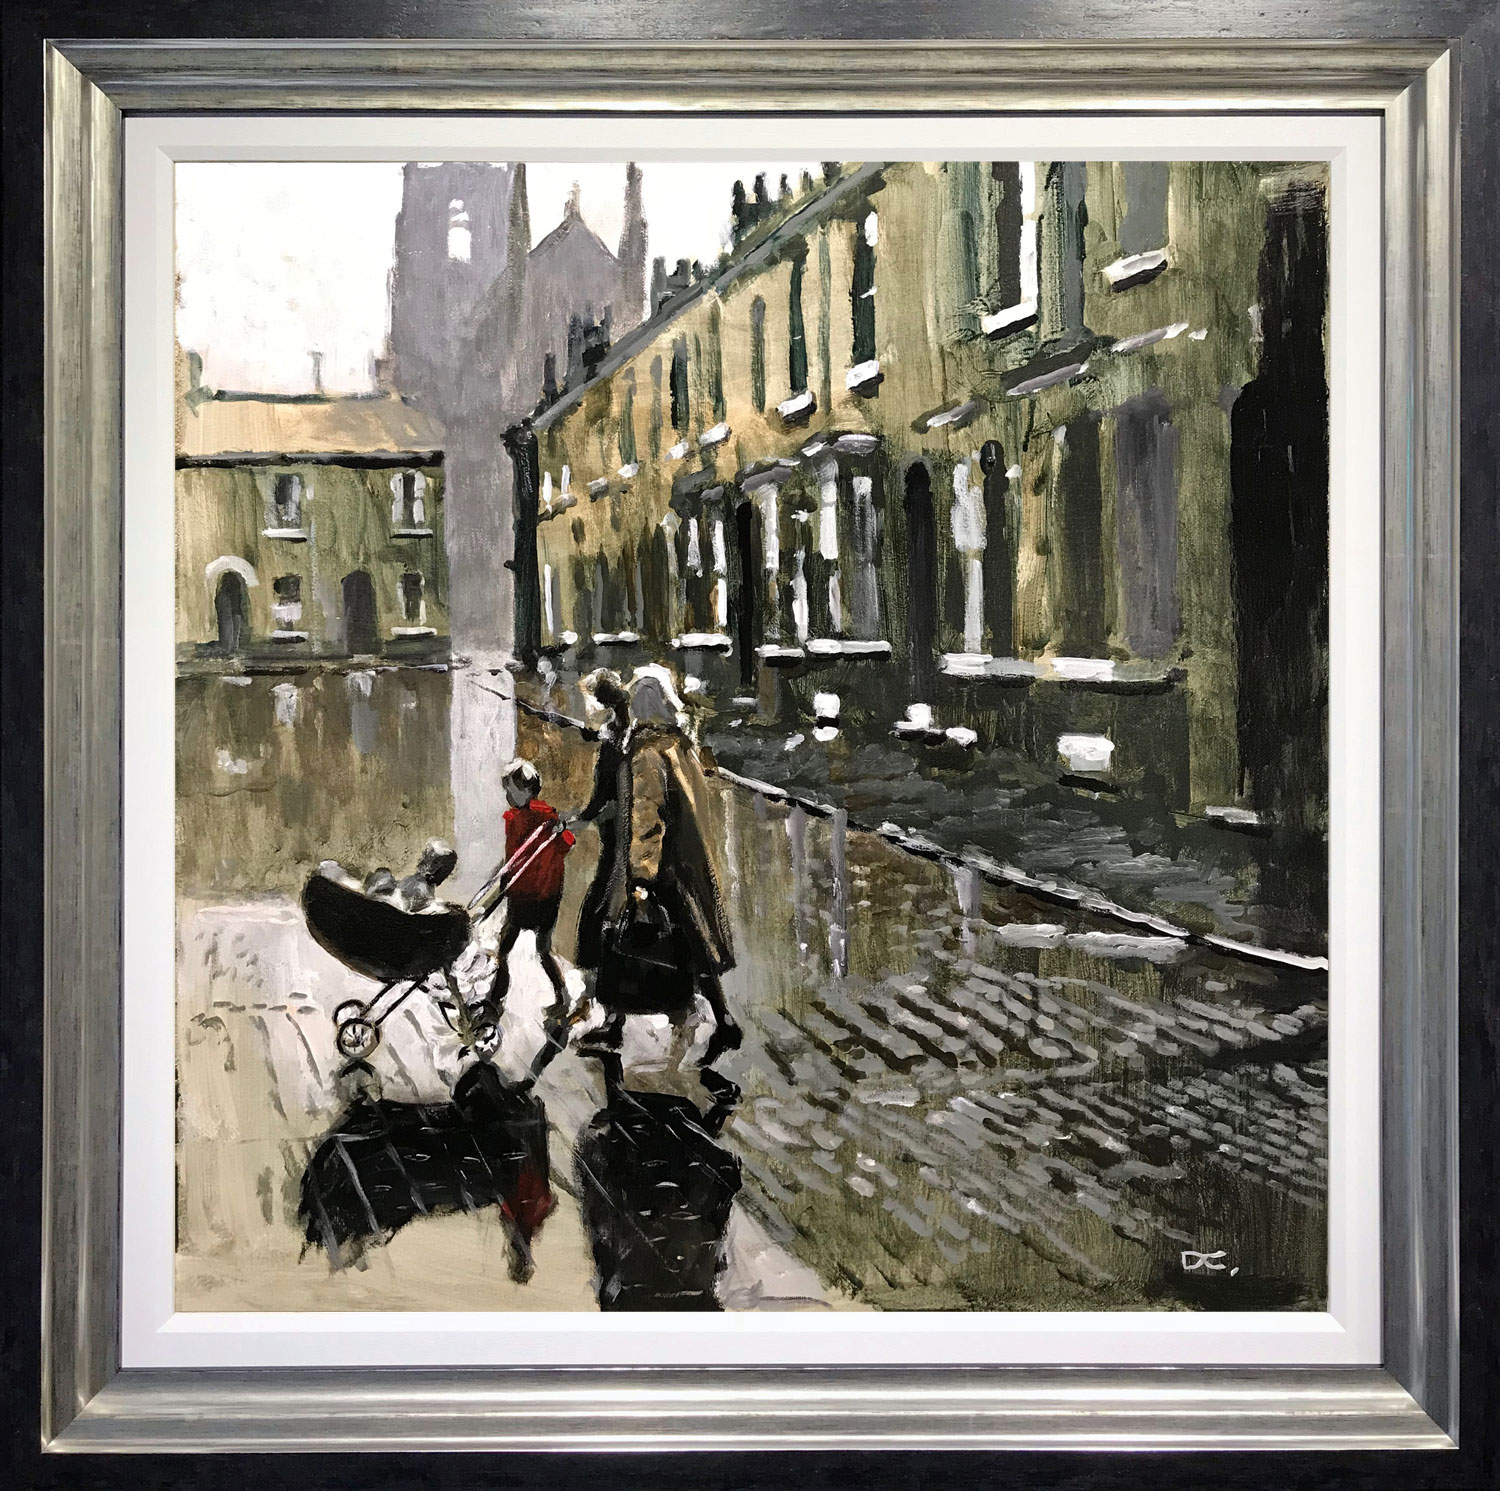 David Coulter Wet Salford, Stockport Original Painting for sale